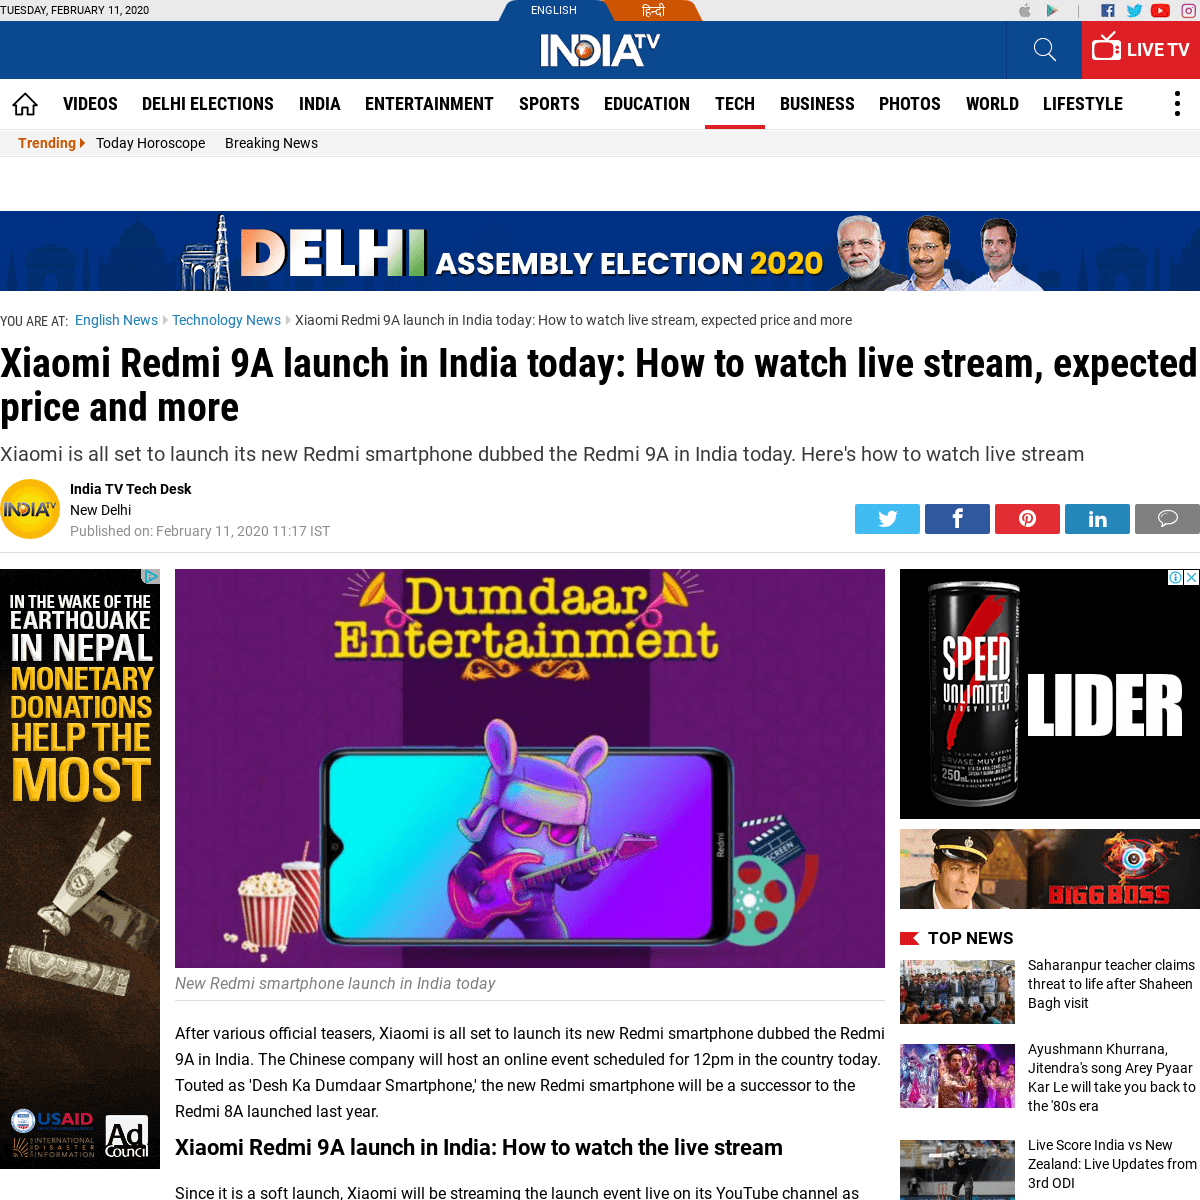 A complete backup of www.indiatvnews.com/technology/news-xiaomi-redmi-9a-launch-india-today-how-to-watch-live-stream-and-more-58